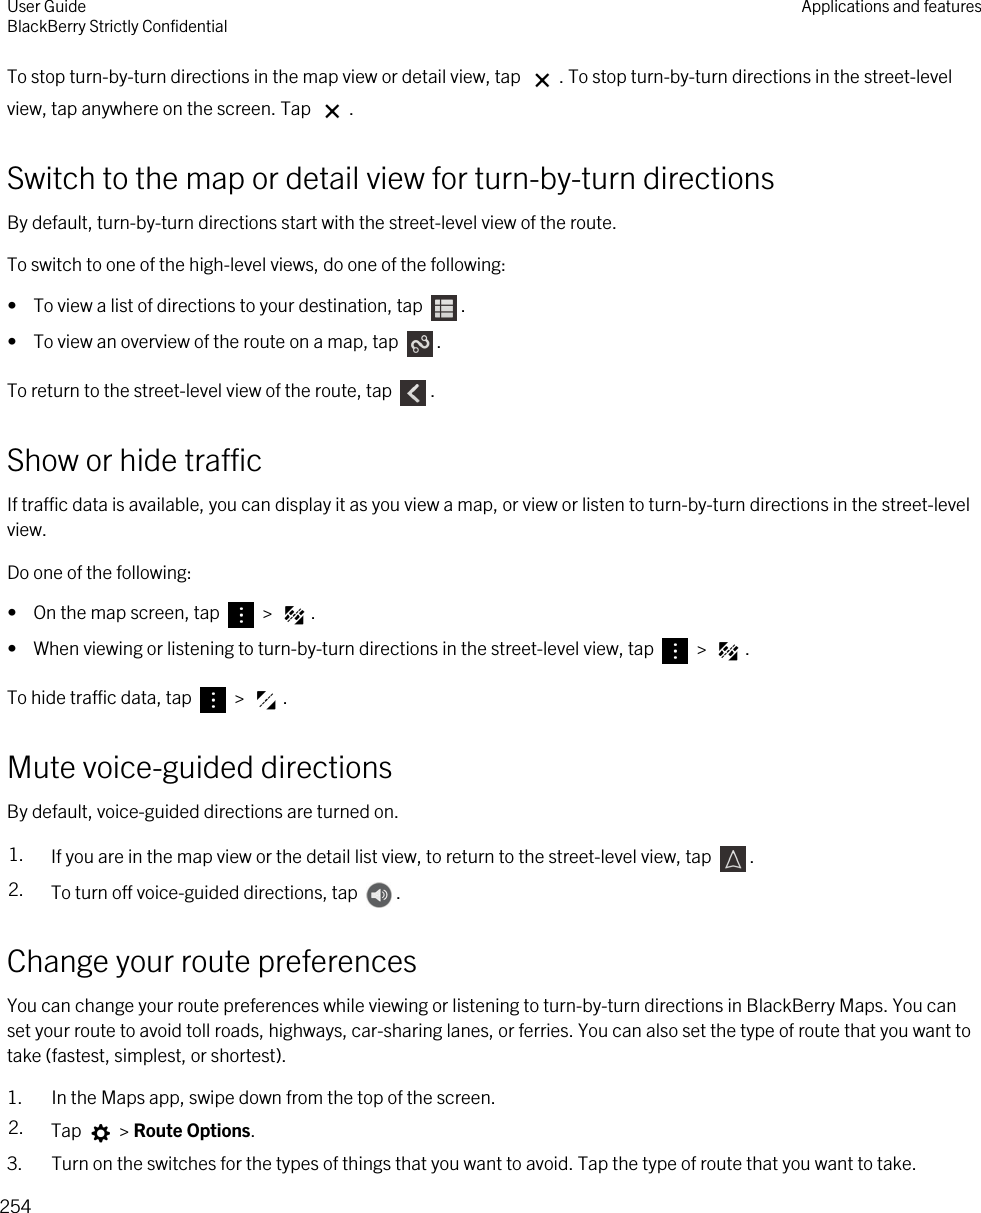 To stop turn-by-turn directions in the map view or detail view, tap  . To stop turn-by-turn directions in the street-level view, tap anywhere on the screen. Tap  .Switch to the map or detail view for turn-by-turn directionsBy default, turn-by-turn directions start with the street-level view of the route.To switch to one of the high-level views, do one of the following:•  To view a list of directions to your destination, tap  .•  To view an overview of the route on a map, tap  .To return to the street-level view of the route, tap  .Show or hide trafficIf traffic data is available, you can display it as you view a map, or view or listen to turn-by-turn directions in the street-level view.Do one of the following:•  On the map screen, tap   &gt;  .•  When viewing or listening to turn-by-turn directions in the street-level view, tap   &gt;  .To hide traffic data, tap   &gt;  .Mute voice-guided directionsBy default, voice-guided directions are turned on.1. If you are in the map view or the detail list view, to return to the street-level view, tap  .2. To turn off voice-guided directions, tap  .Change your route preferencesYou can change your route preferences while viewing or listening to turn-by-turn directions in BlackBerry Maps. You can set your route to avoid toll roads, highways, car-sharing lanes, or ferries. You can also set the type of route that you want to take (fastest, simplest, or shortest).1. In the Maps app, swipe down from the top of the screen.2. Tap   &gt; Route Options.3. Turn on the switches for the types of things that you want to avoid. Tap the type of route that you want to take.User GuideBlackBerry Strictly Confidential Applications and features254